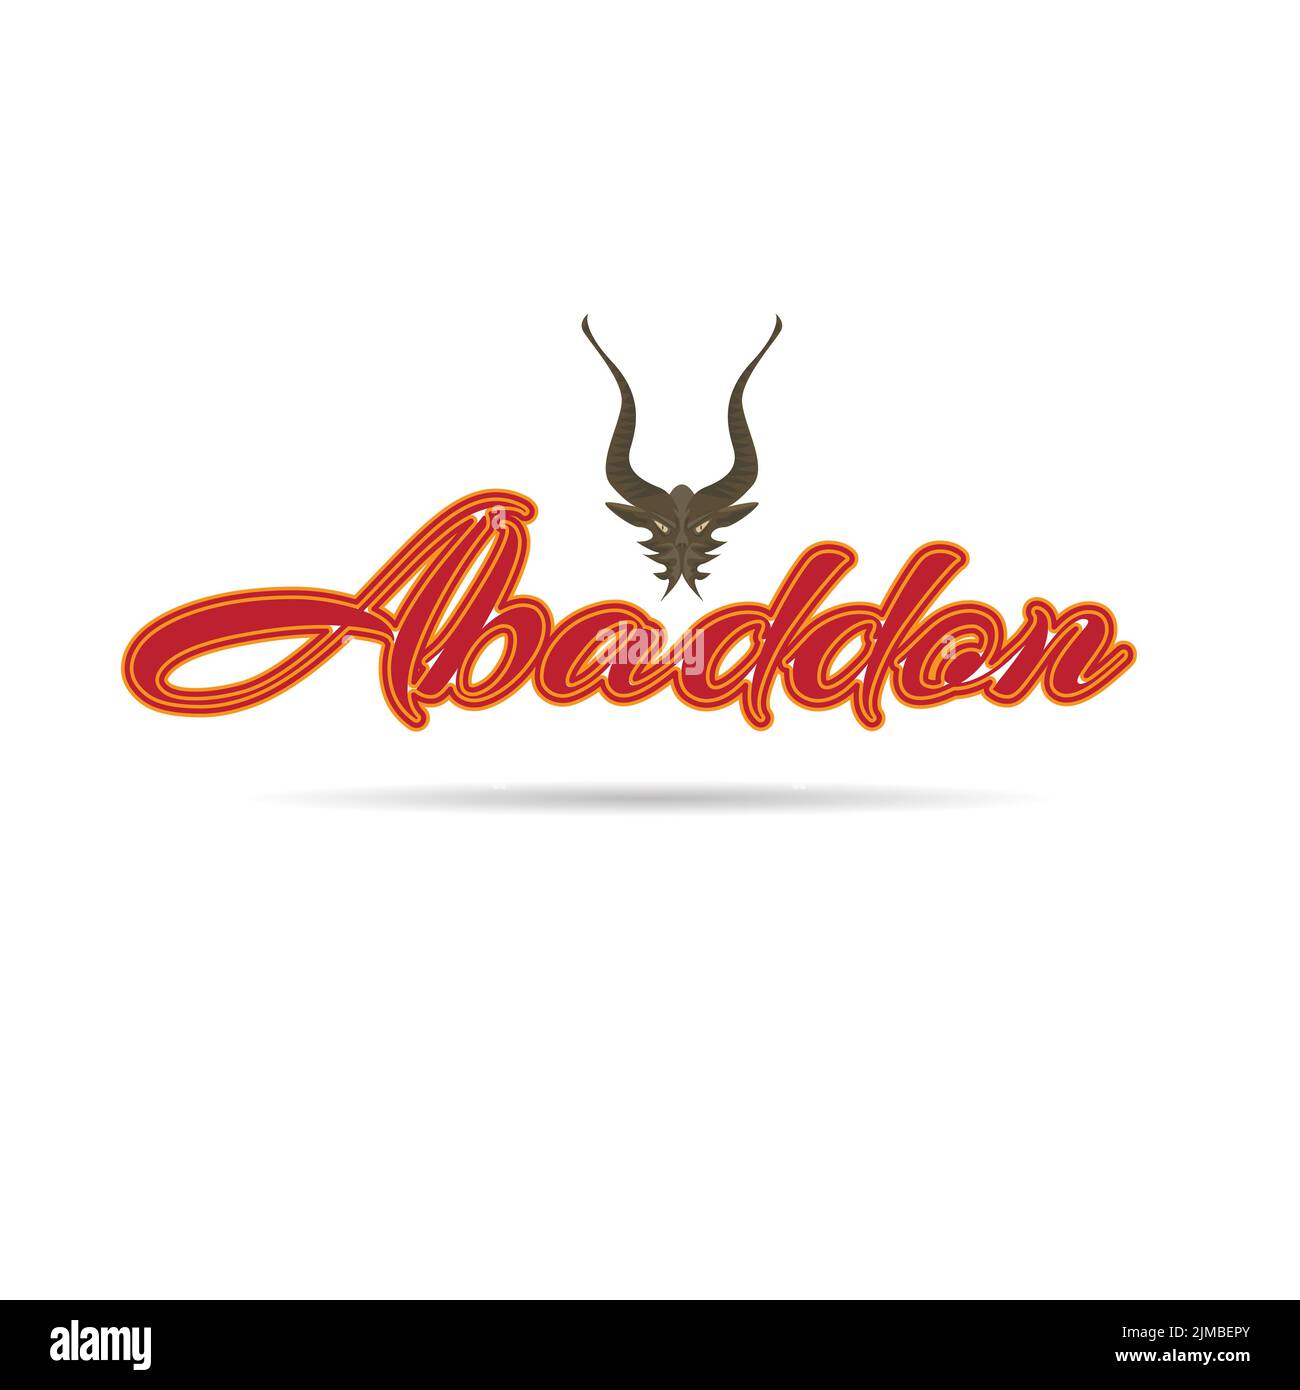 Calligraphy title for Abaddon angel of hell icon Stock Vector